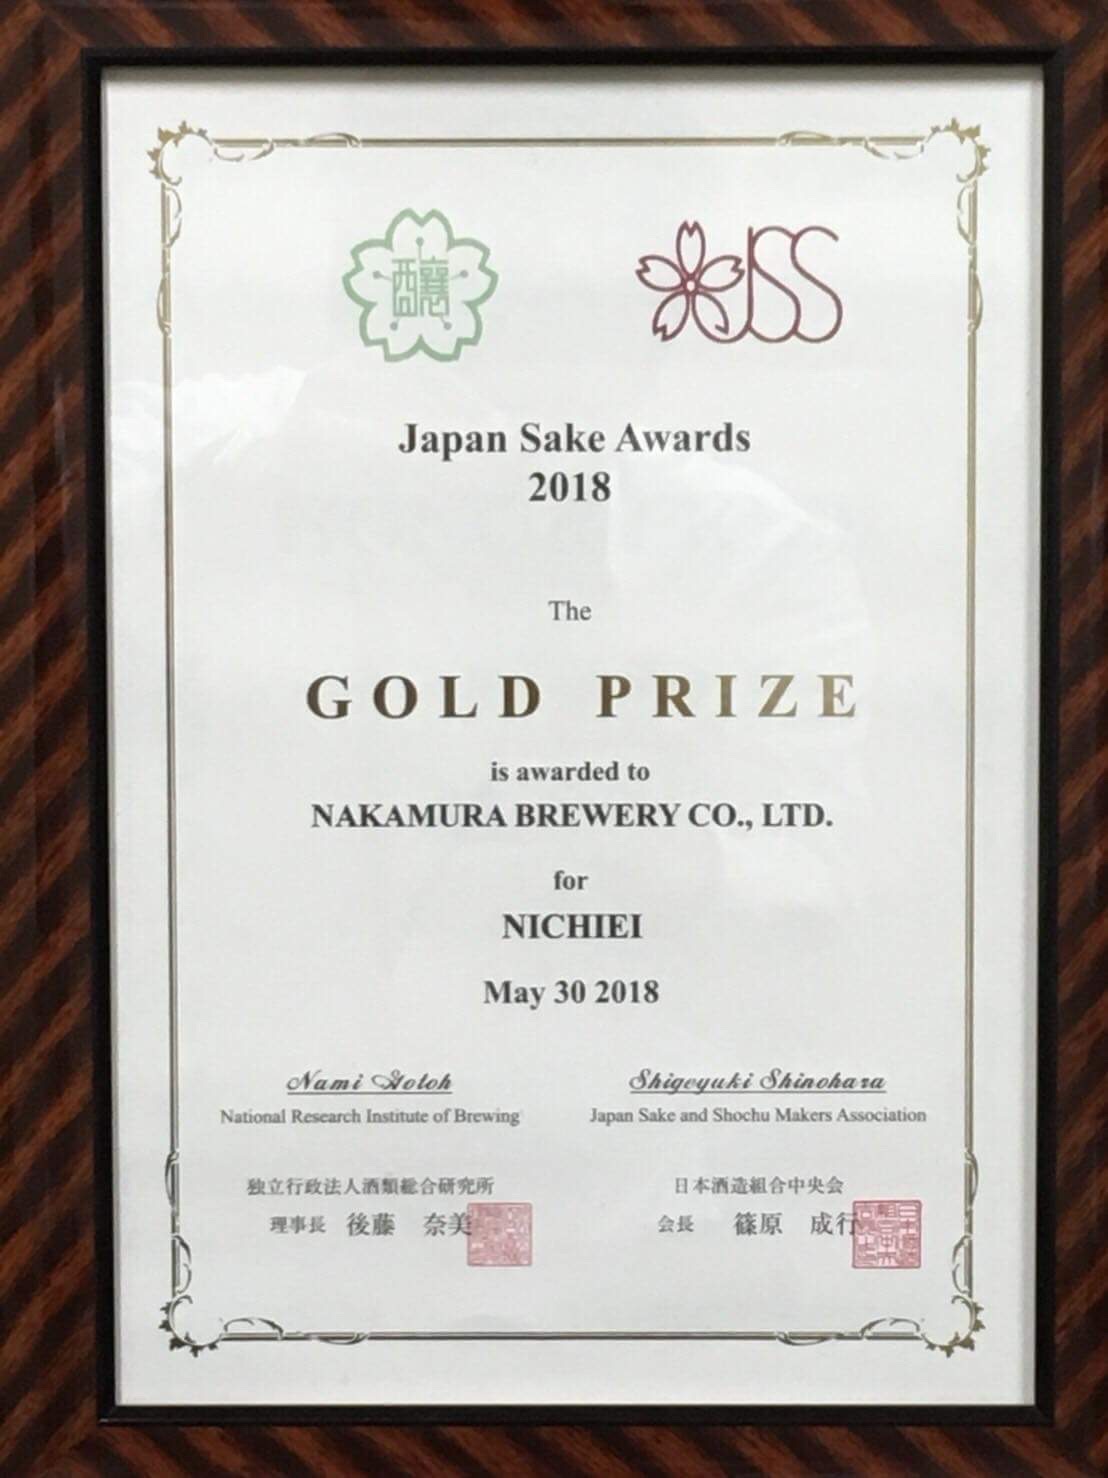 Japan Sake Awards 2018 - The Gold Prize is awarded to Nakamura Brewery Co., Ltd for Nichiei - May 30, 2018 - Nami Gotoh, National Research Institute of Brewing - Shigeyuki Shinohara, Japan Sake and Shochu Makers Association